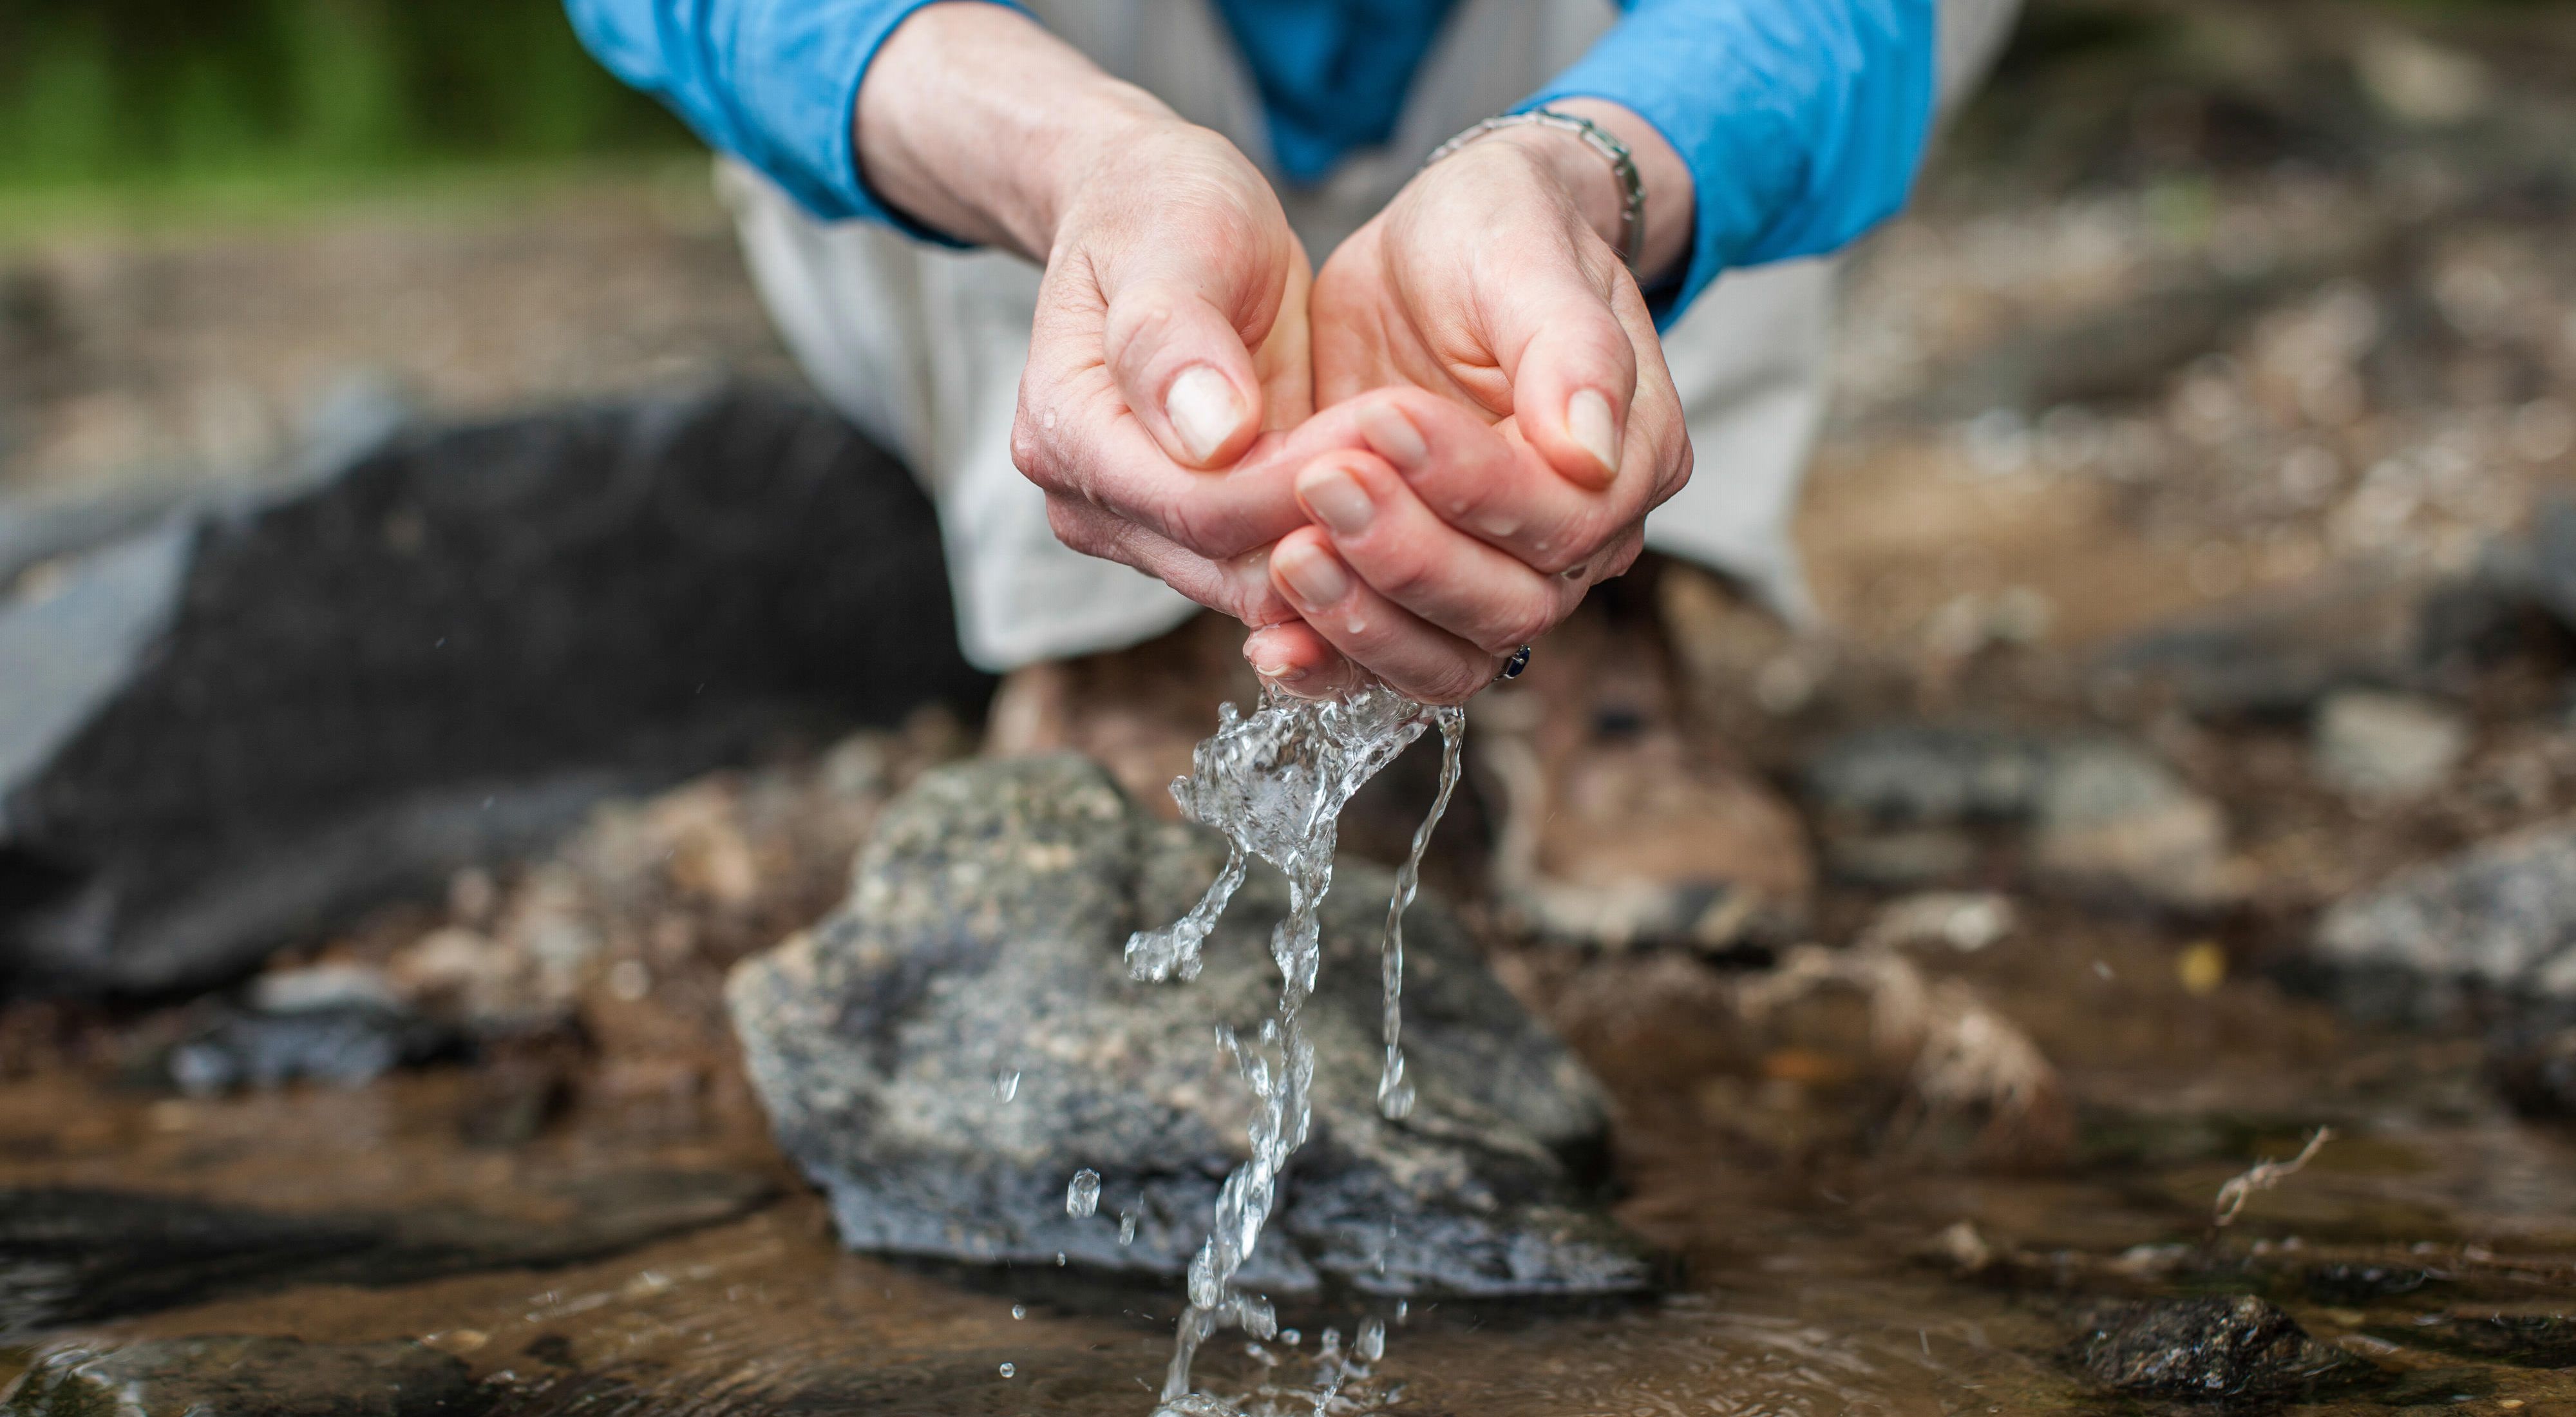 Two hands scooping up clean water from a stream.